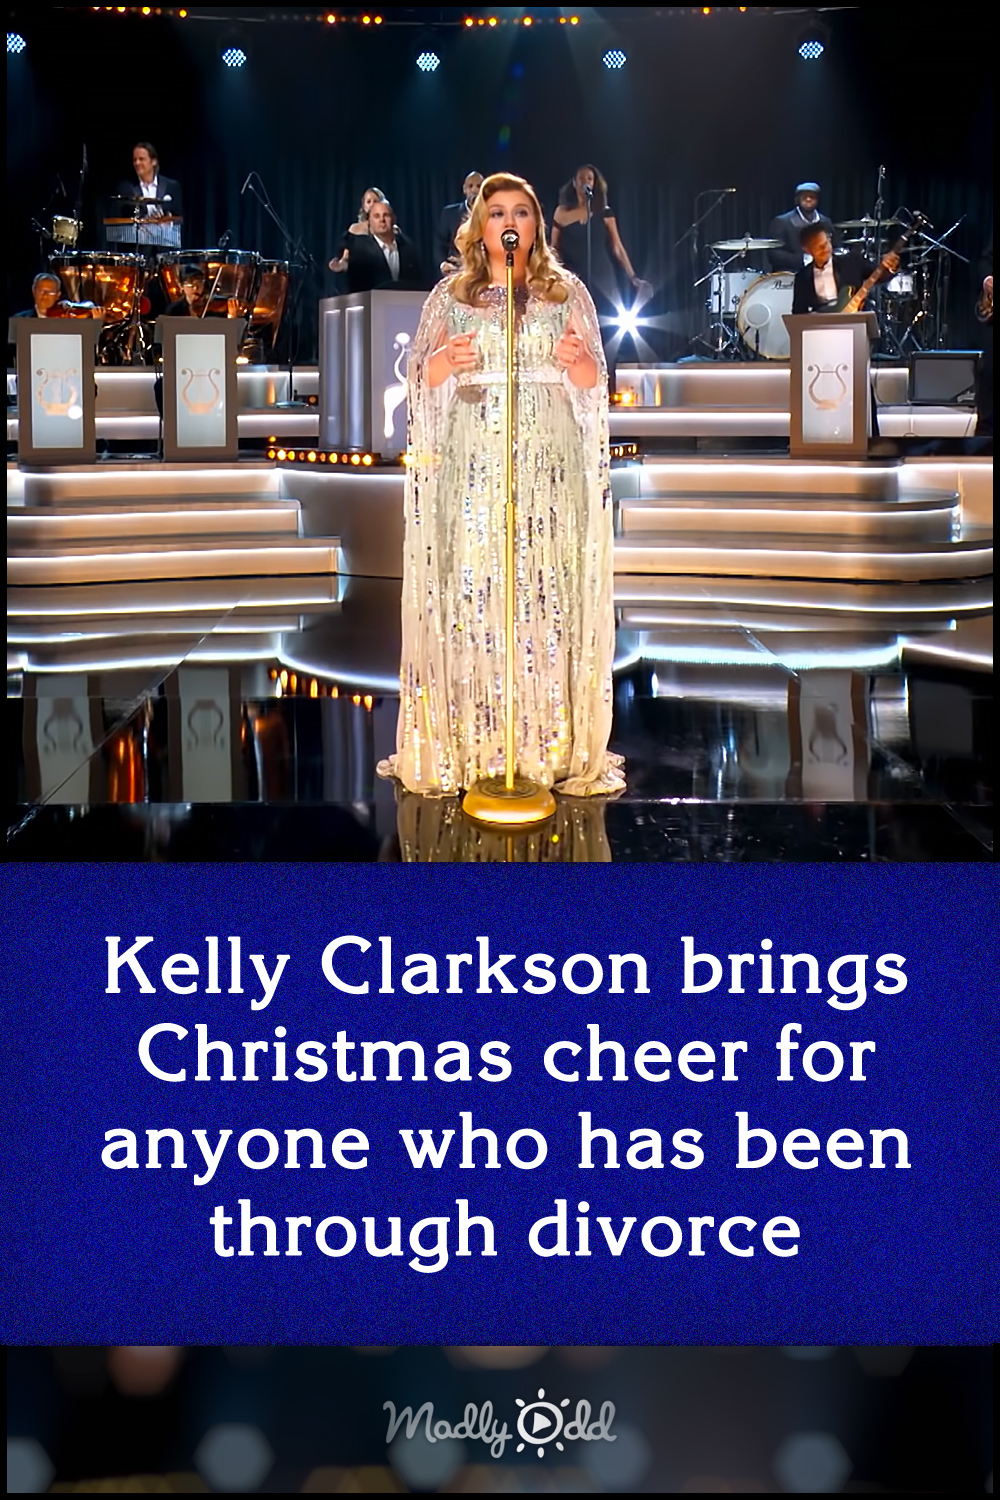 Kelly Clarkson brings Christmas cheer for anyone who has been through divorce